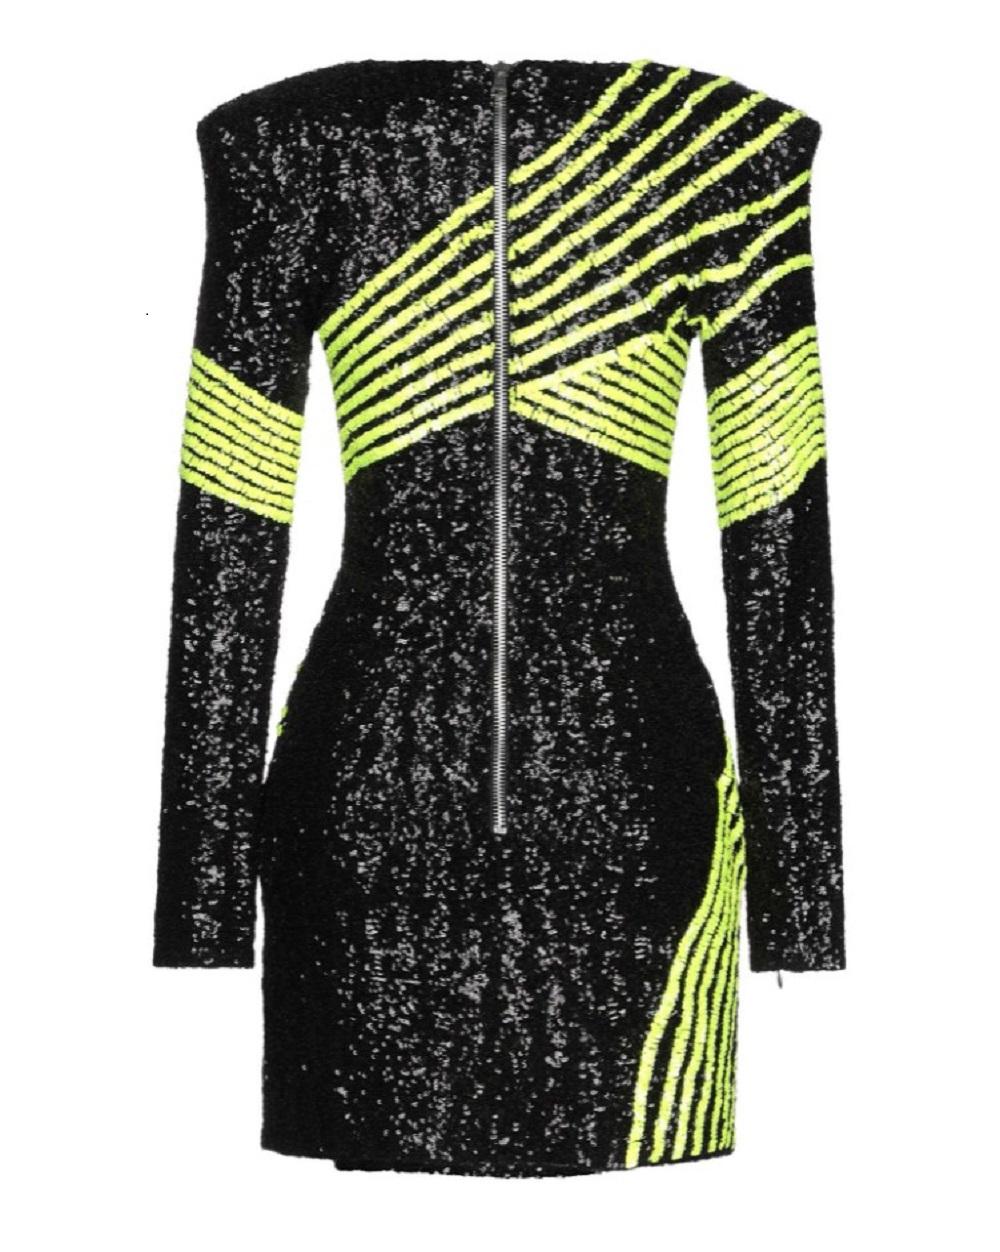 New Balmain Sequin-Embellished Mini Dress
Designer size 38
Fully Sequin-Embellished, Black and Lemon Toxic Green Colors, Overstuffed Shoulder Pads, Fully Lined, Zip Closure Sleeves and Back, Side Slit.
Measurements: Length - 33 inches, Bust -